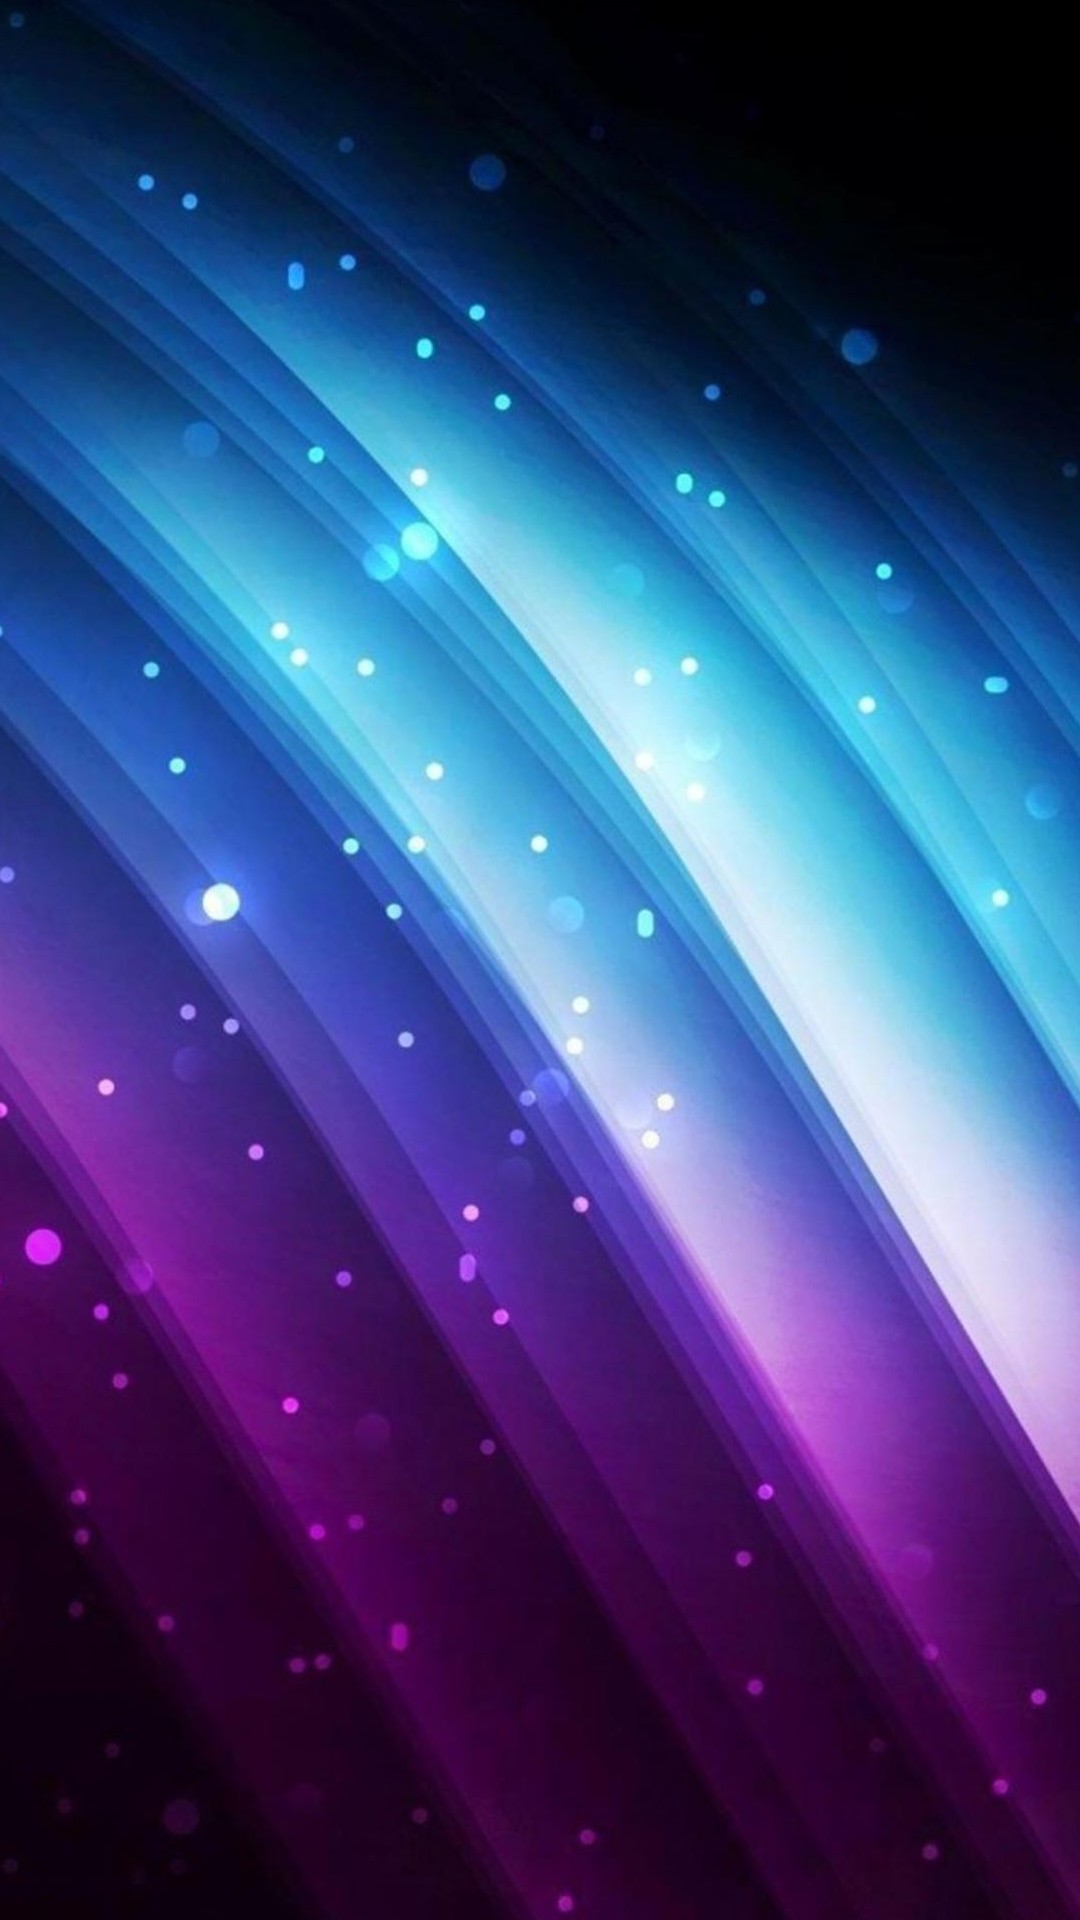 1080x1920 Colorful Samsung Galaxy Note 3 Wallpapers 87